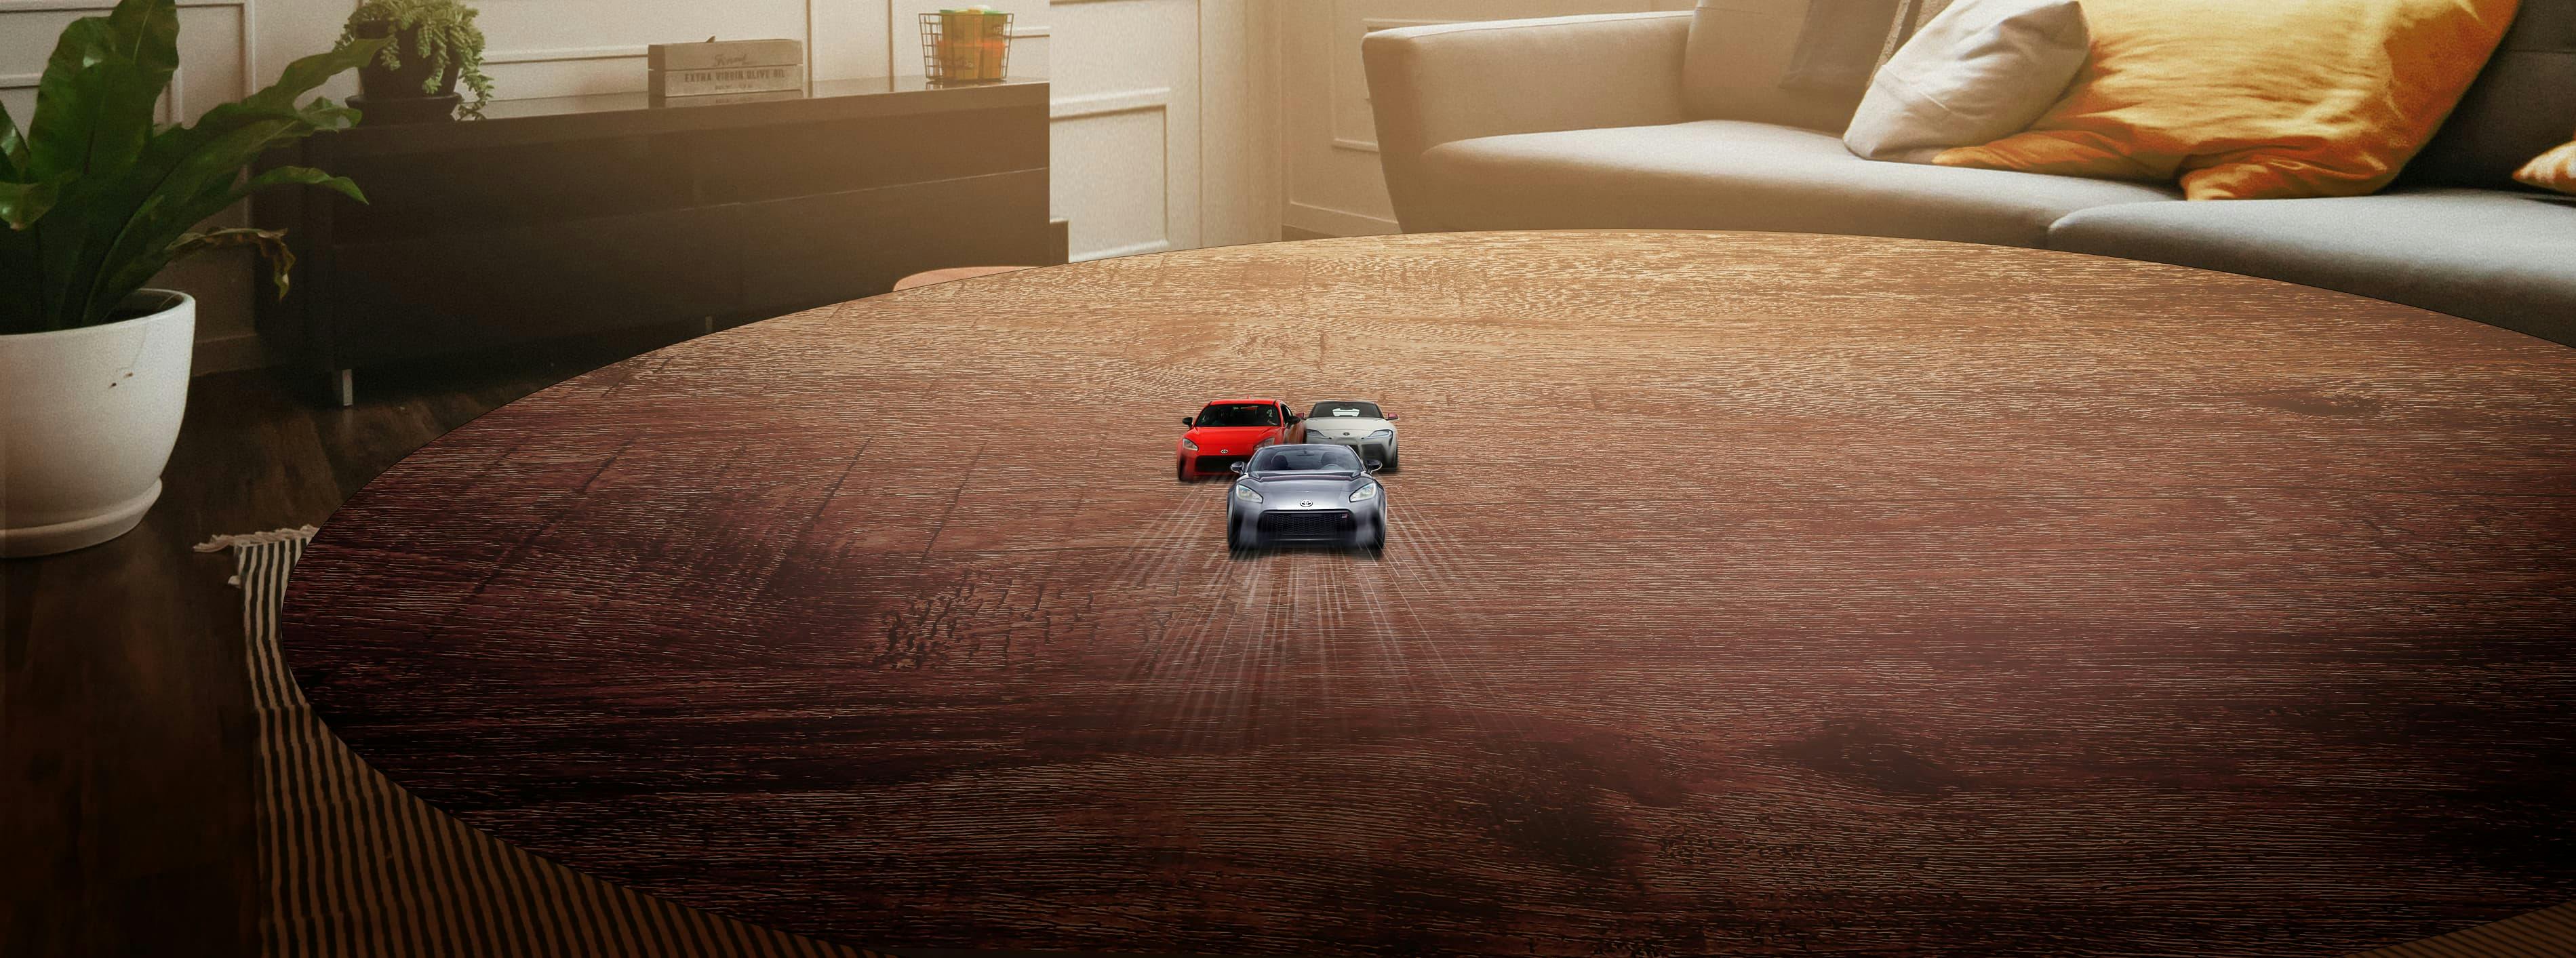 Cars on table 2